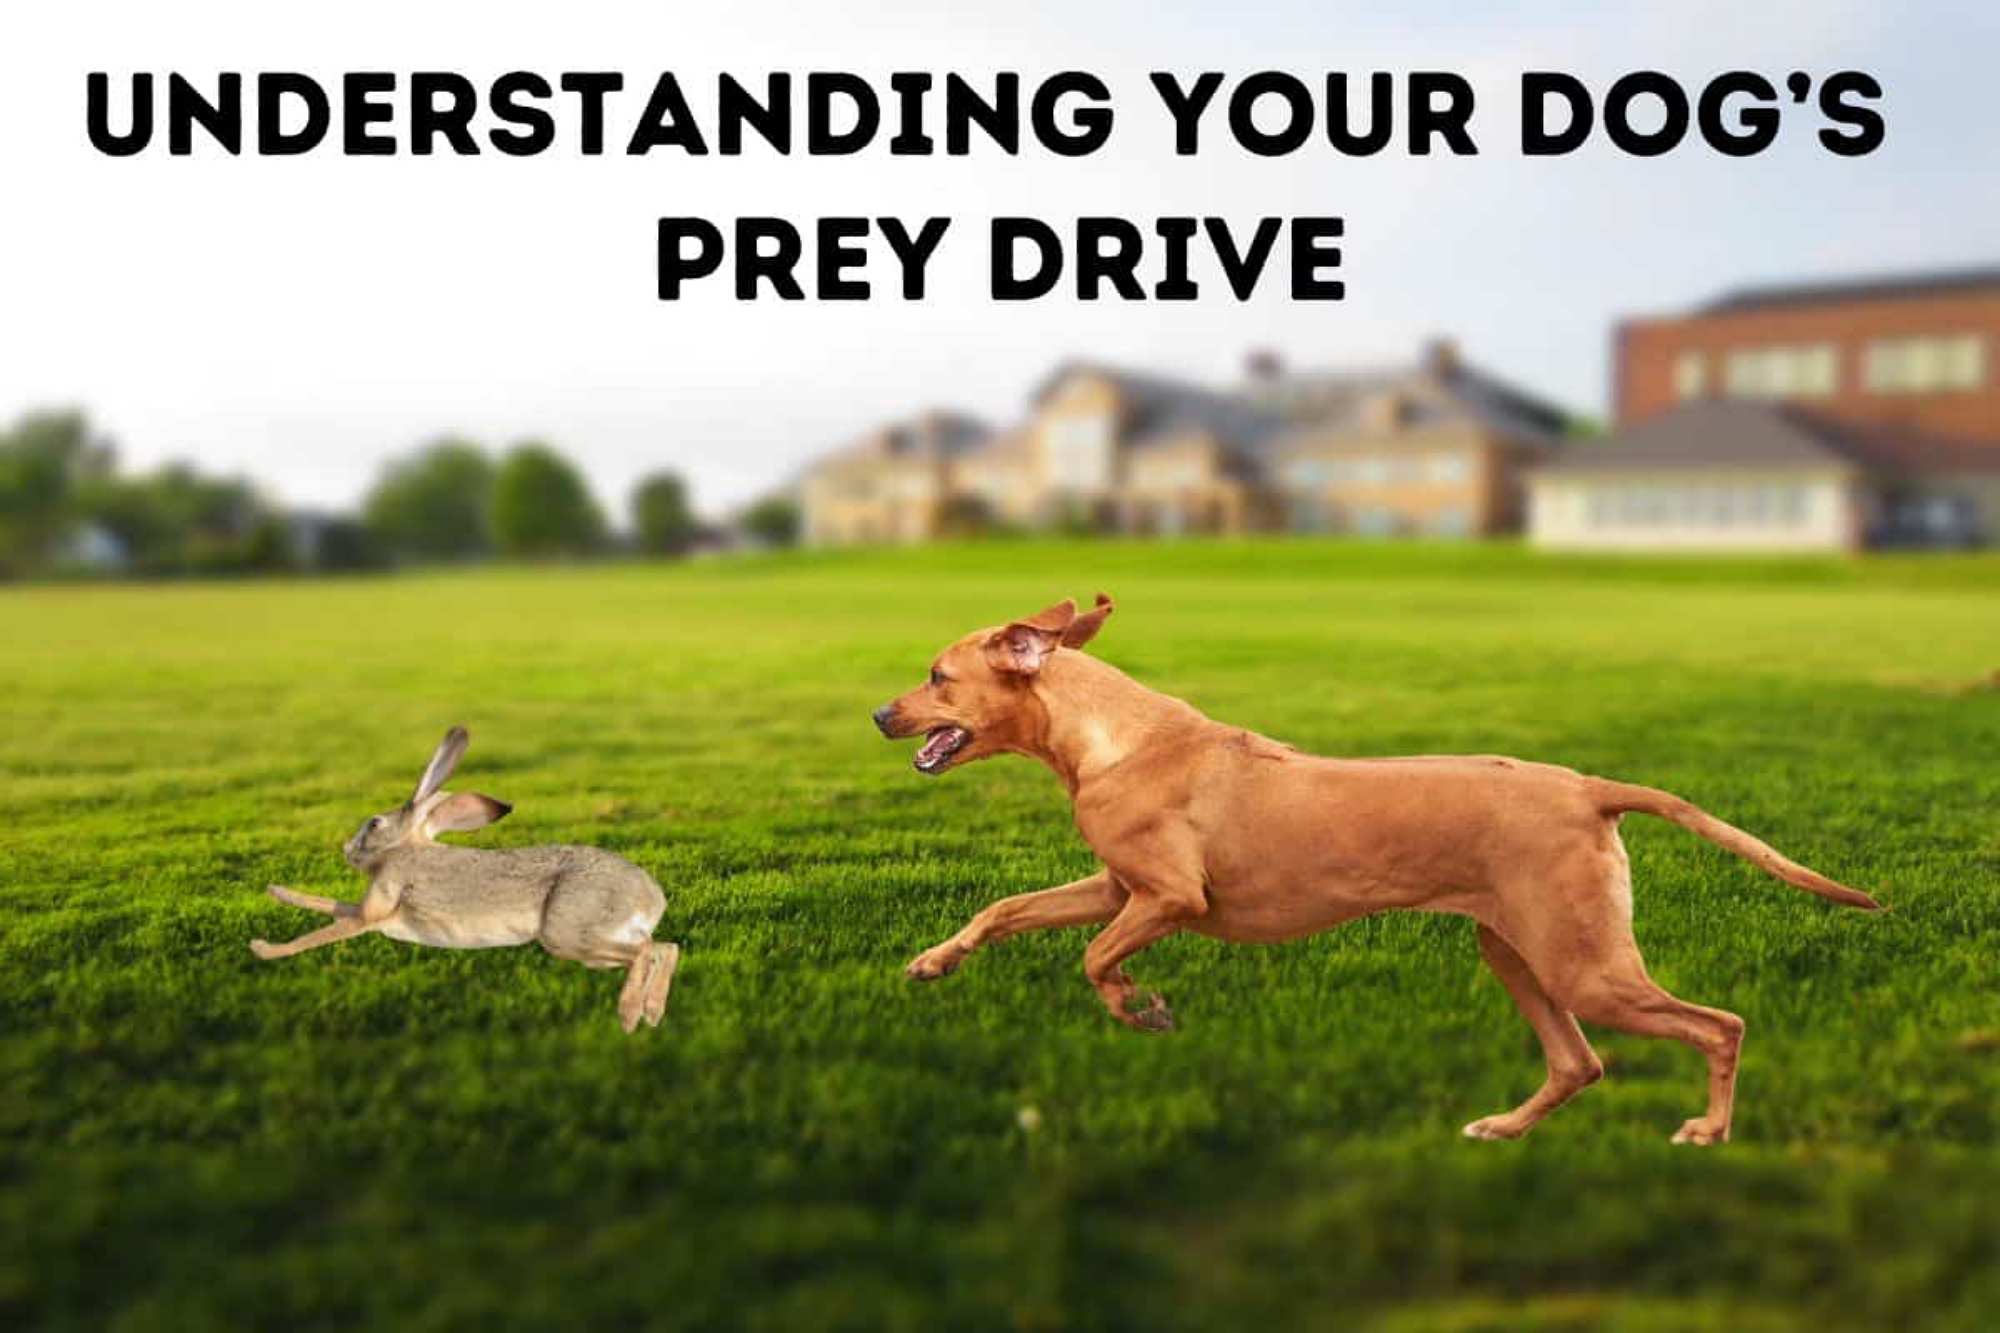 dog chasing a rabbit. Title reads Understanding Your Dog Prey Drive